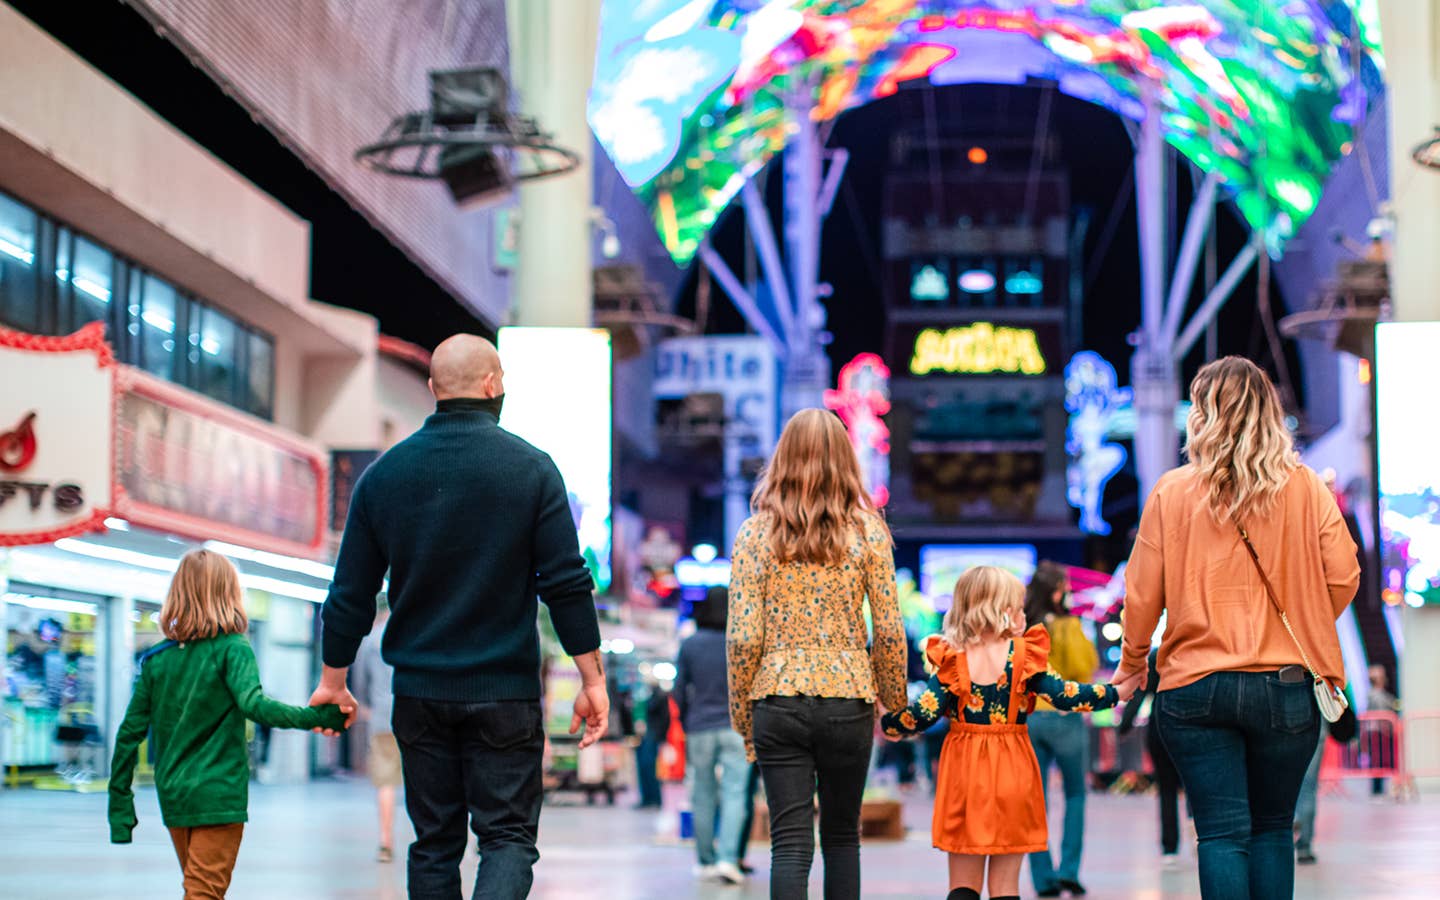 The Haby family walk down Fremont street near our Desert Club Resort located in Las Vegas, Nevada.